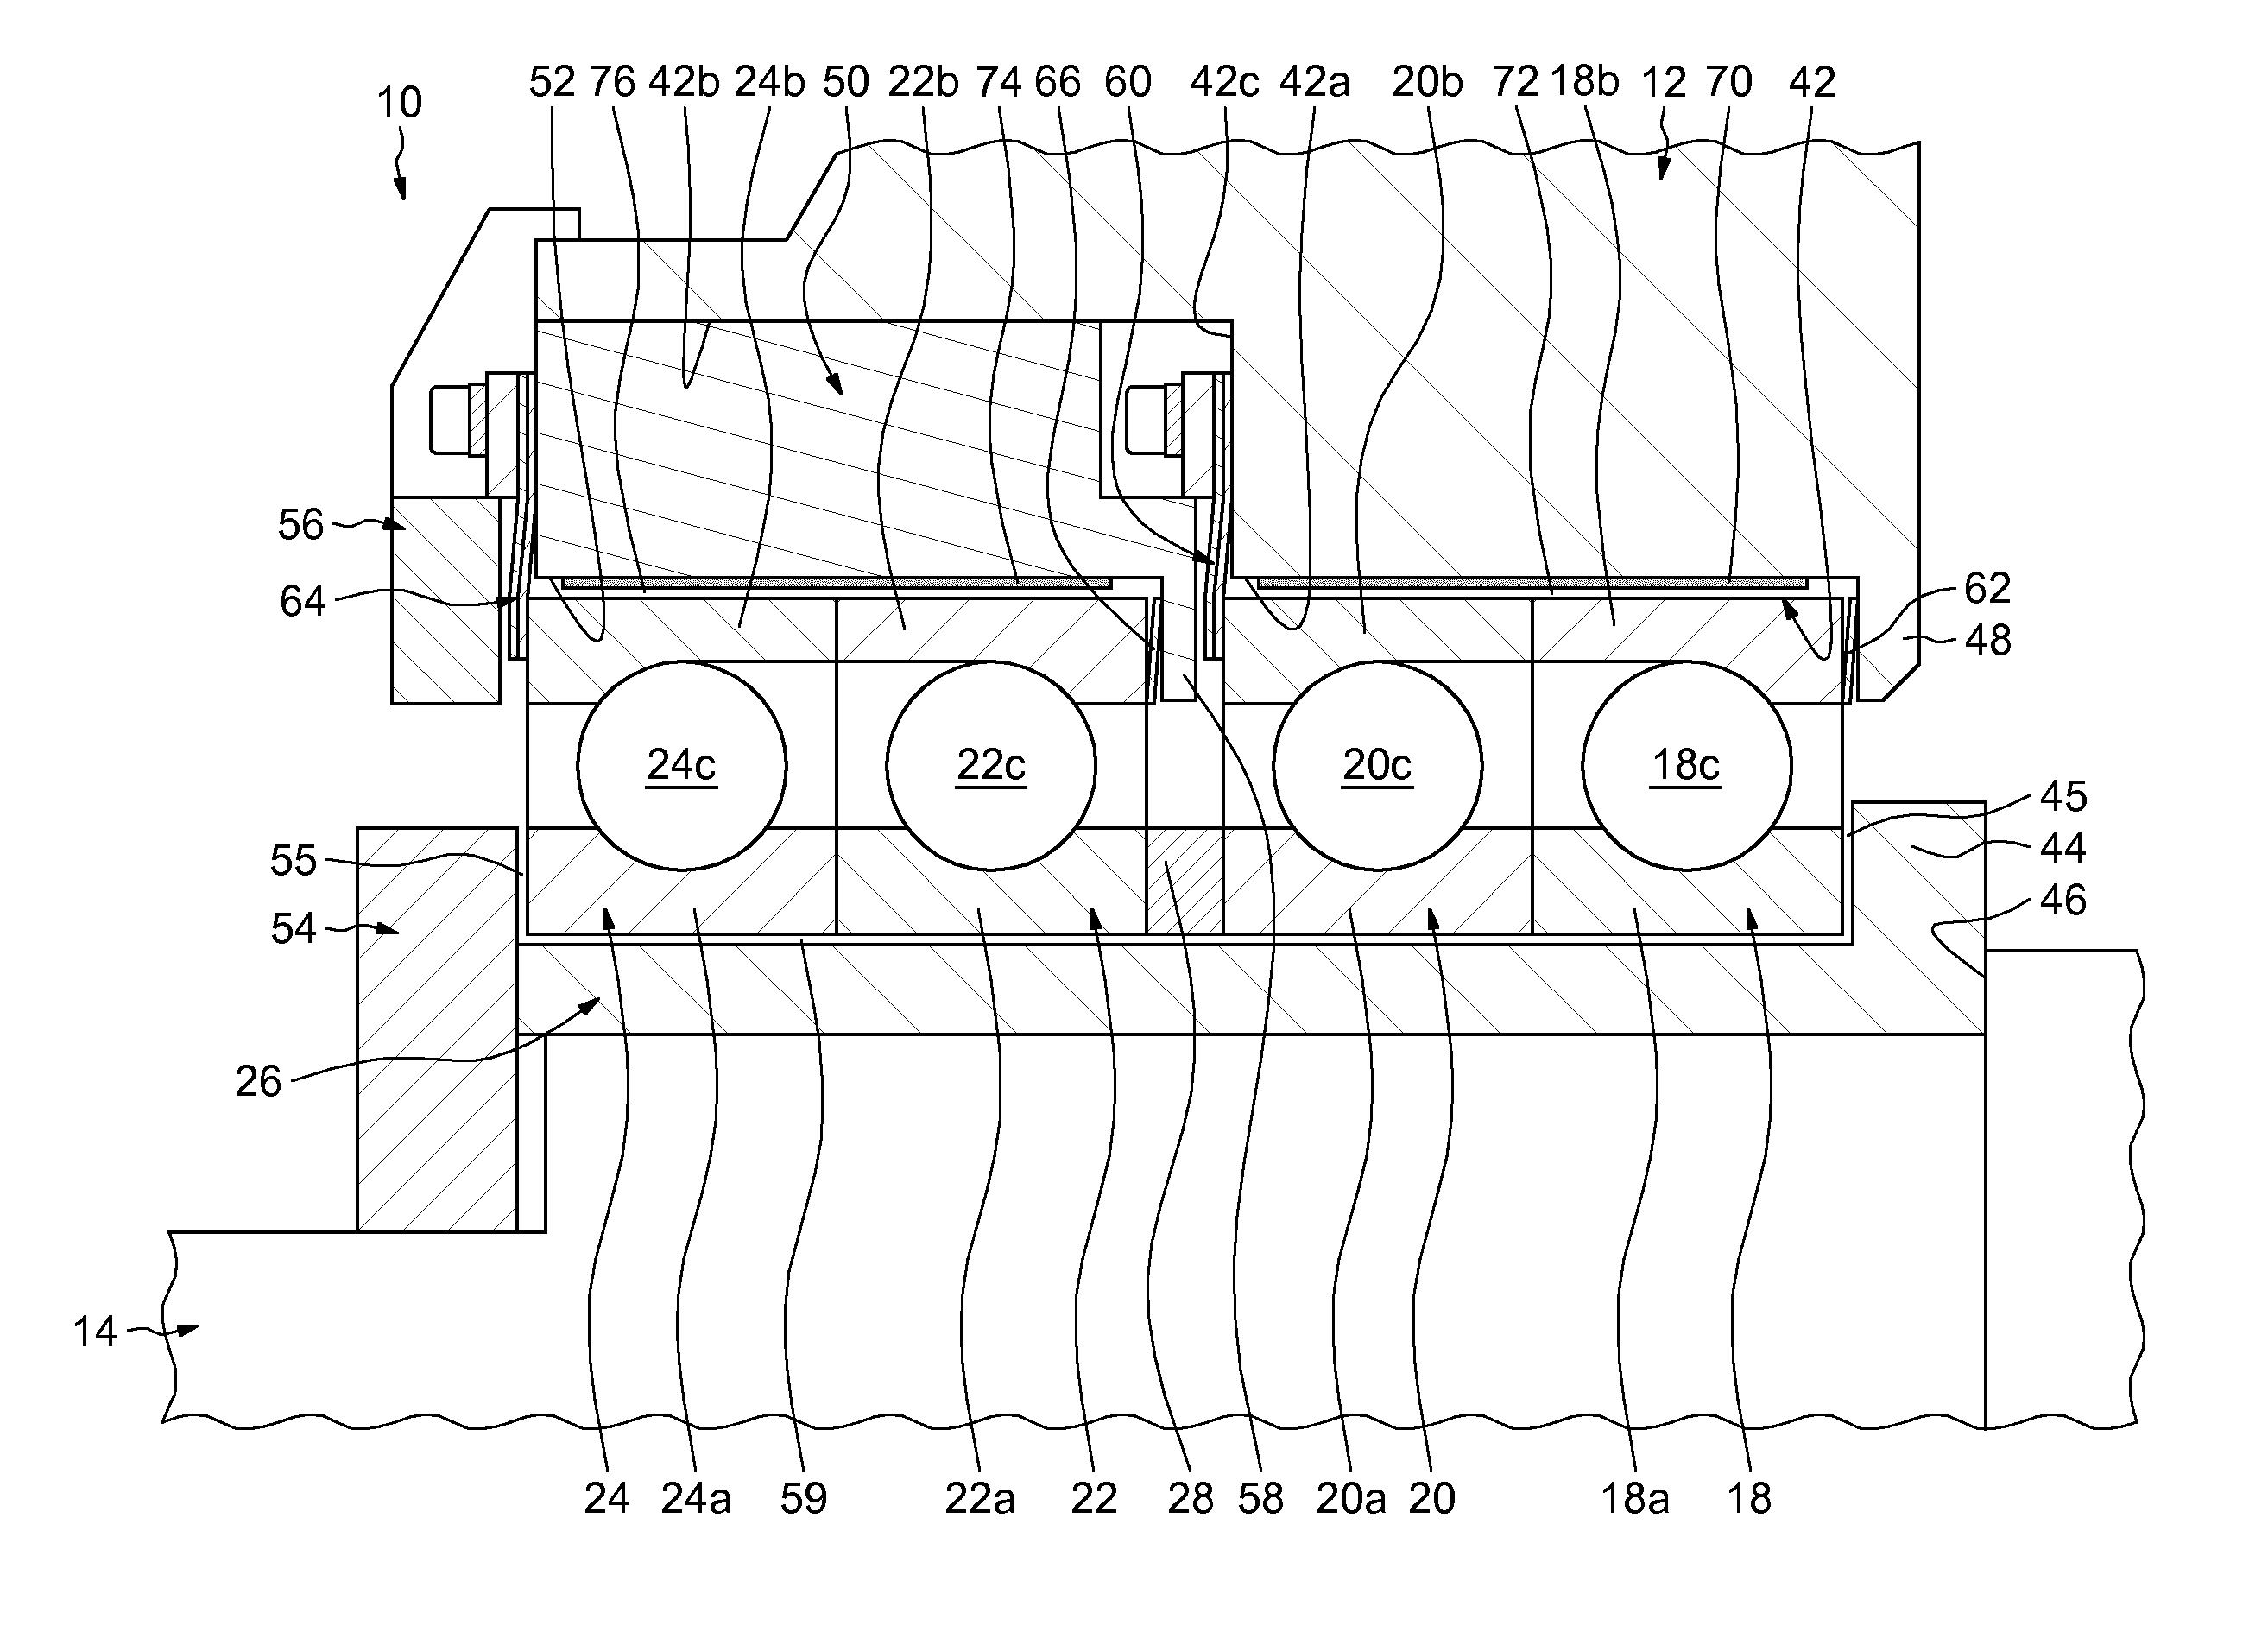 Rotating machine with at least one active magnetic bearing and spaced auxiliary rolling bearings